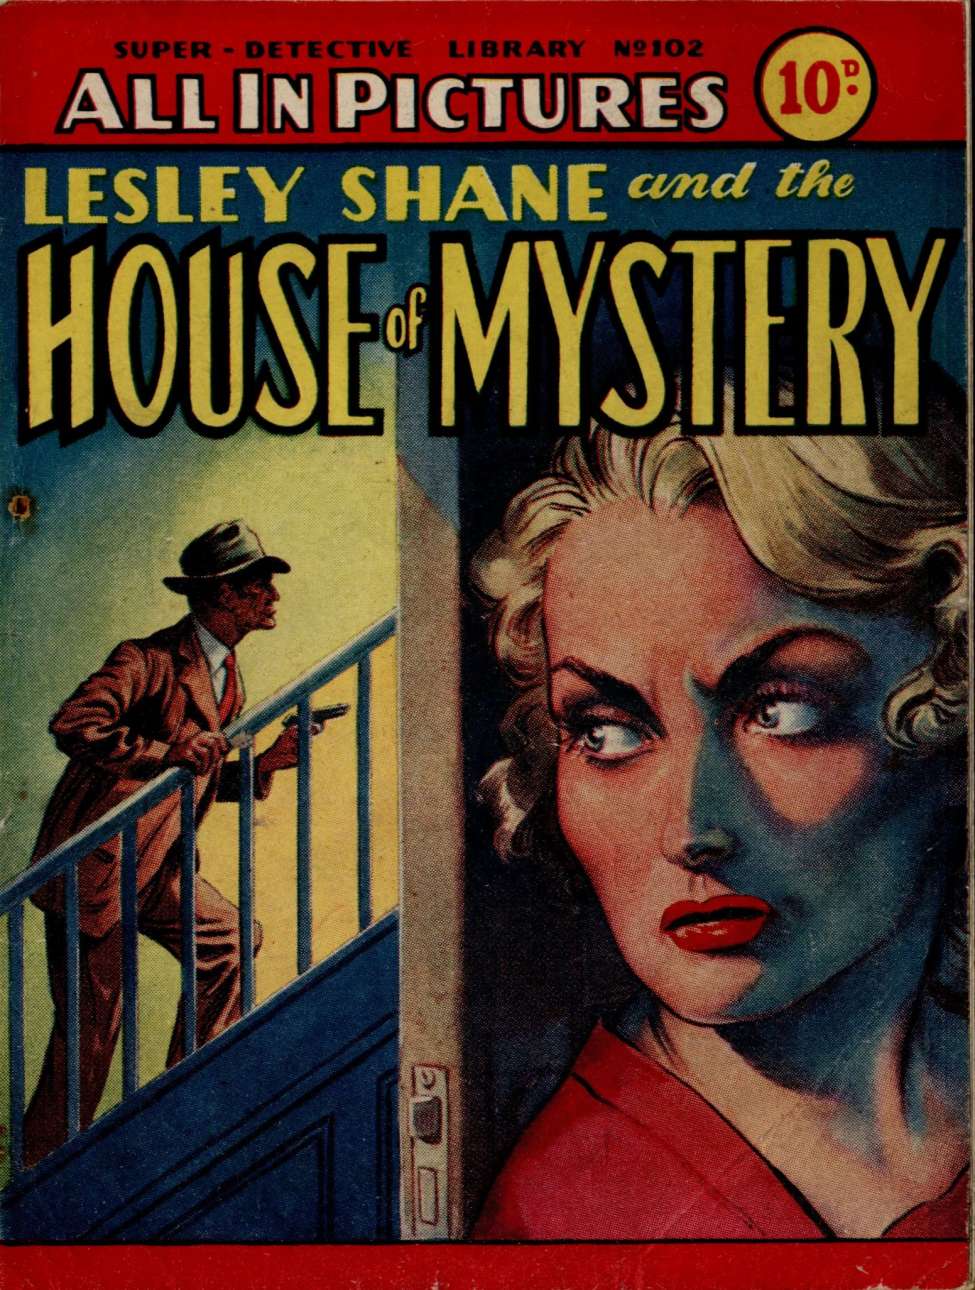 Book Cover For Super Detective Library 102 - The House of Mystery